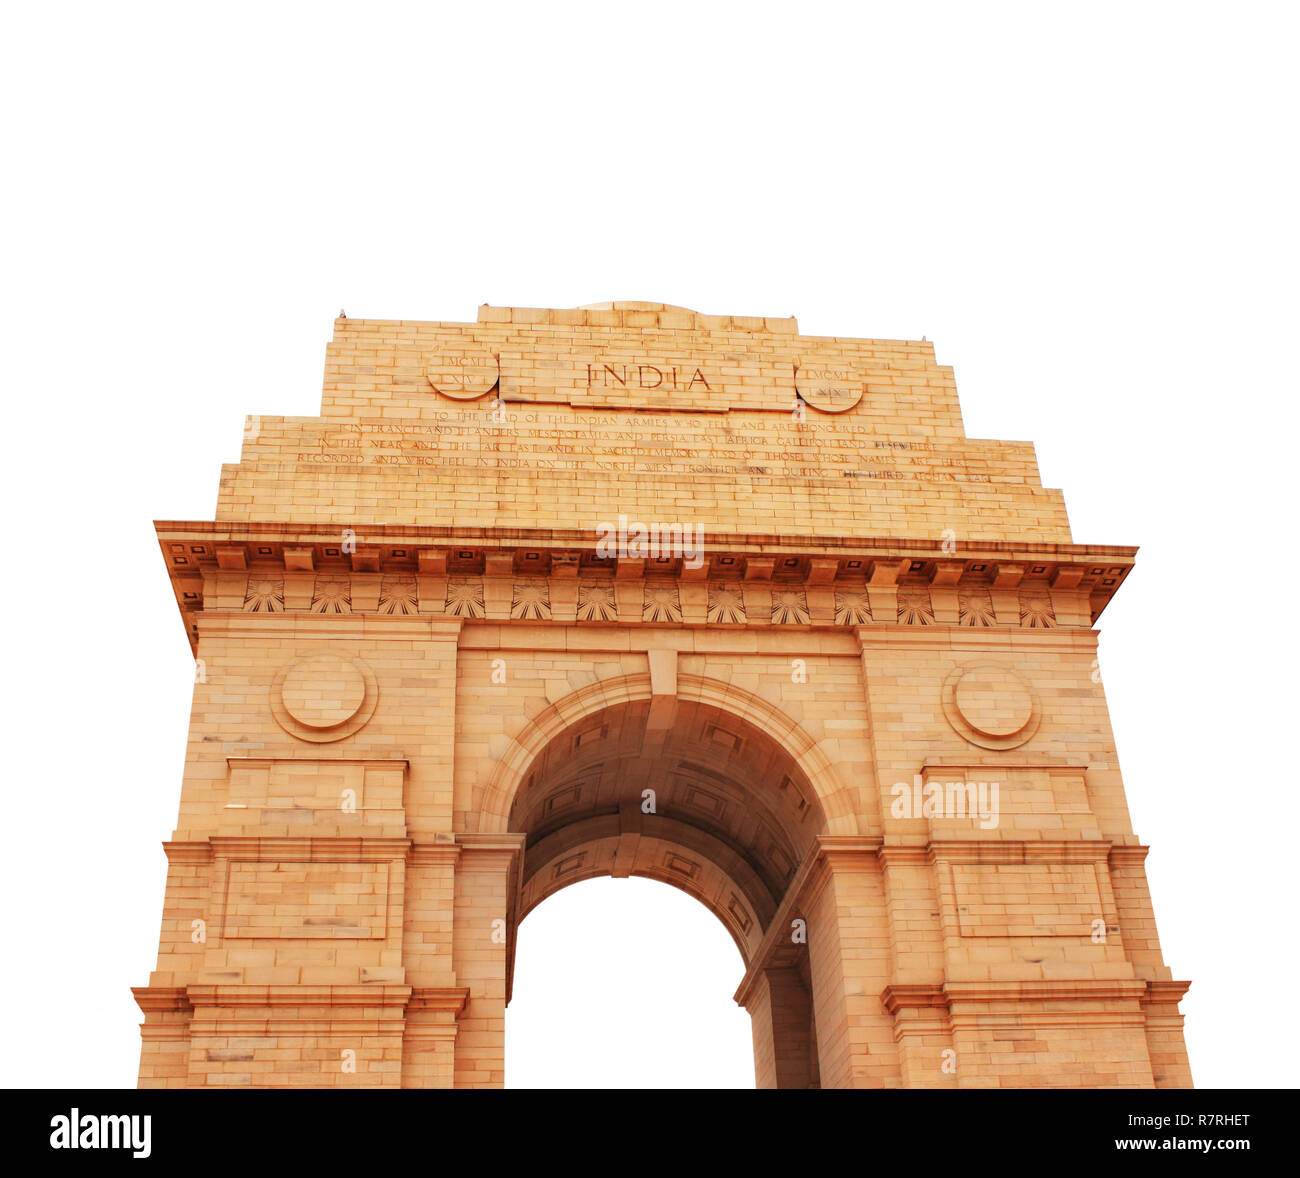 India Gate memorial in New Delhi, India. Isolated on white background Stock Photo